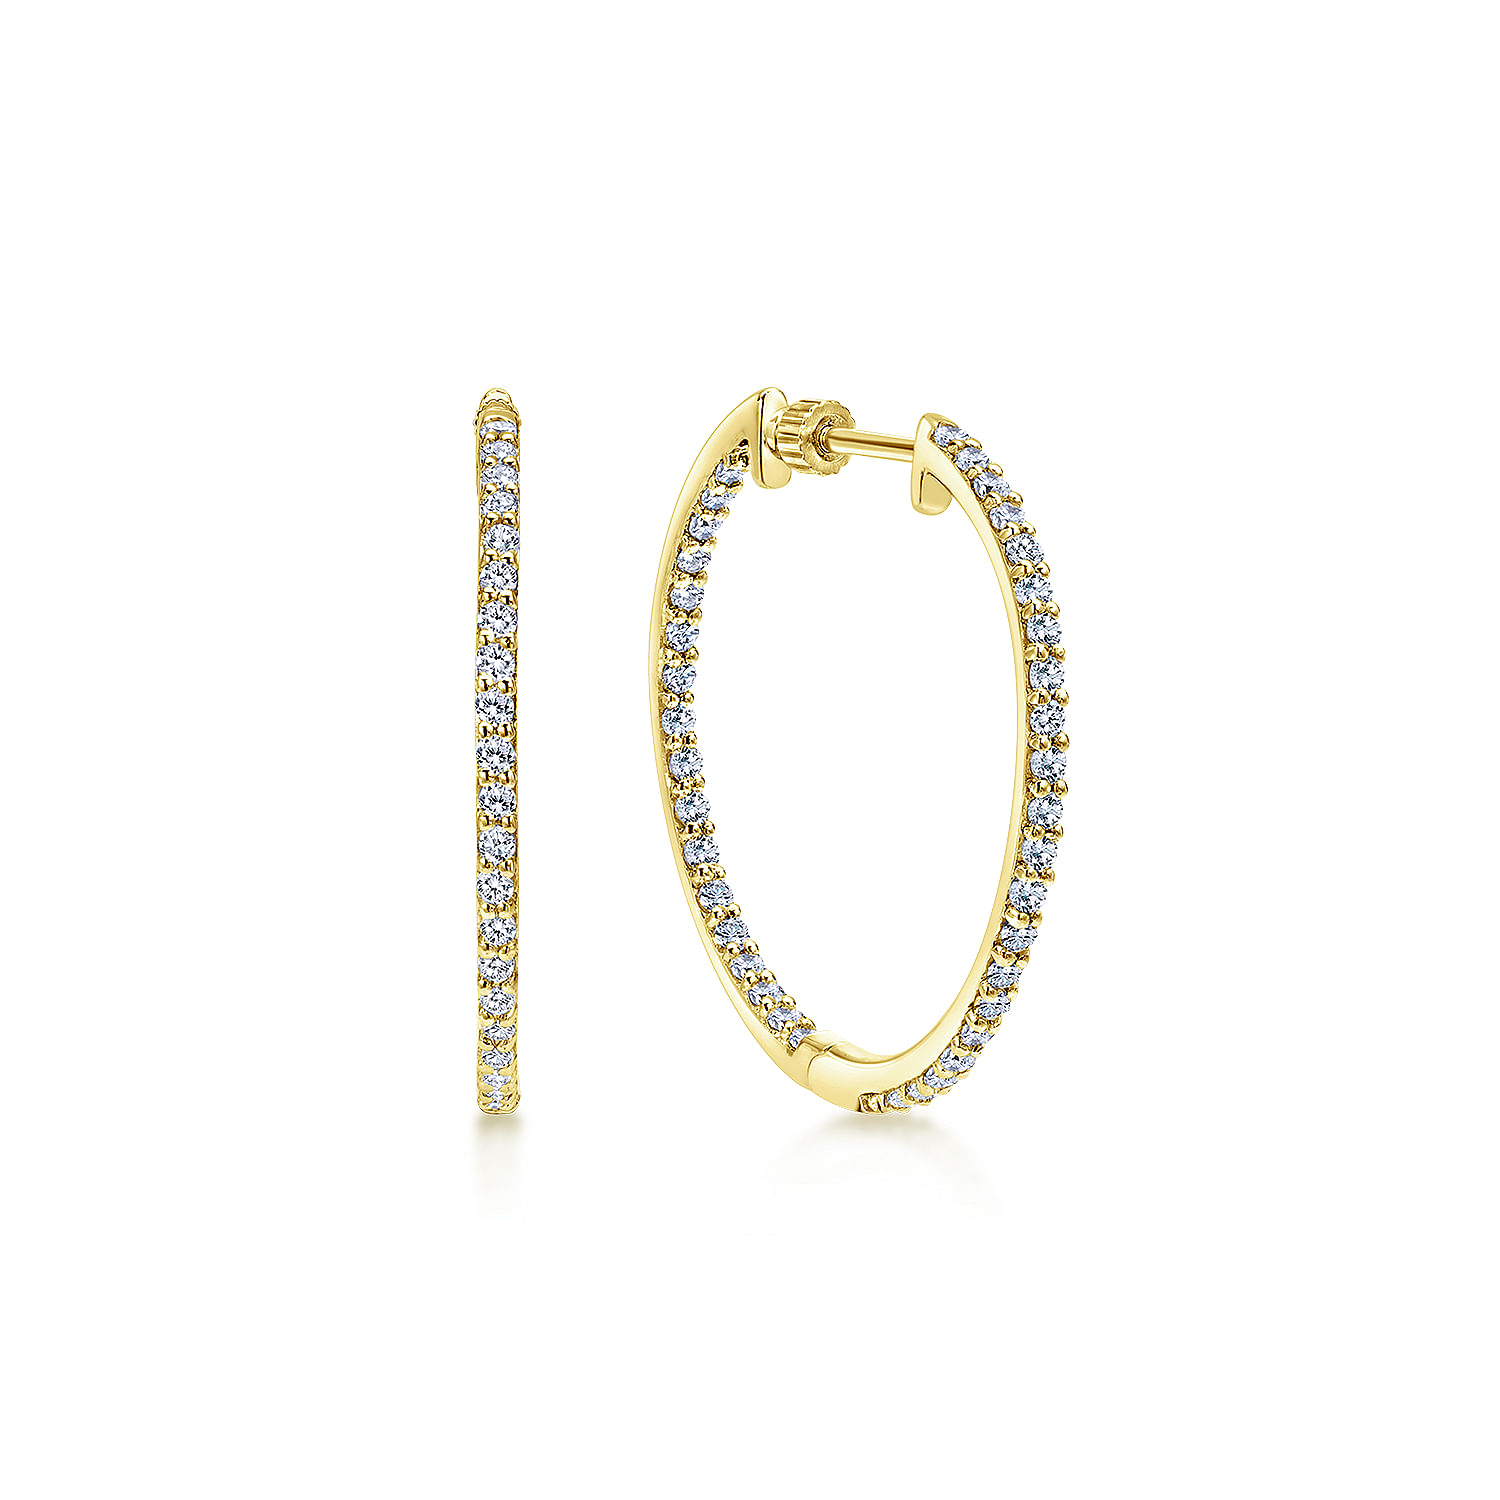 14K Yellow Gold 25mm Round Inside Out Diamond Hoop Earrings